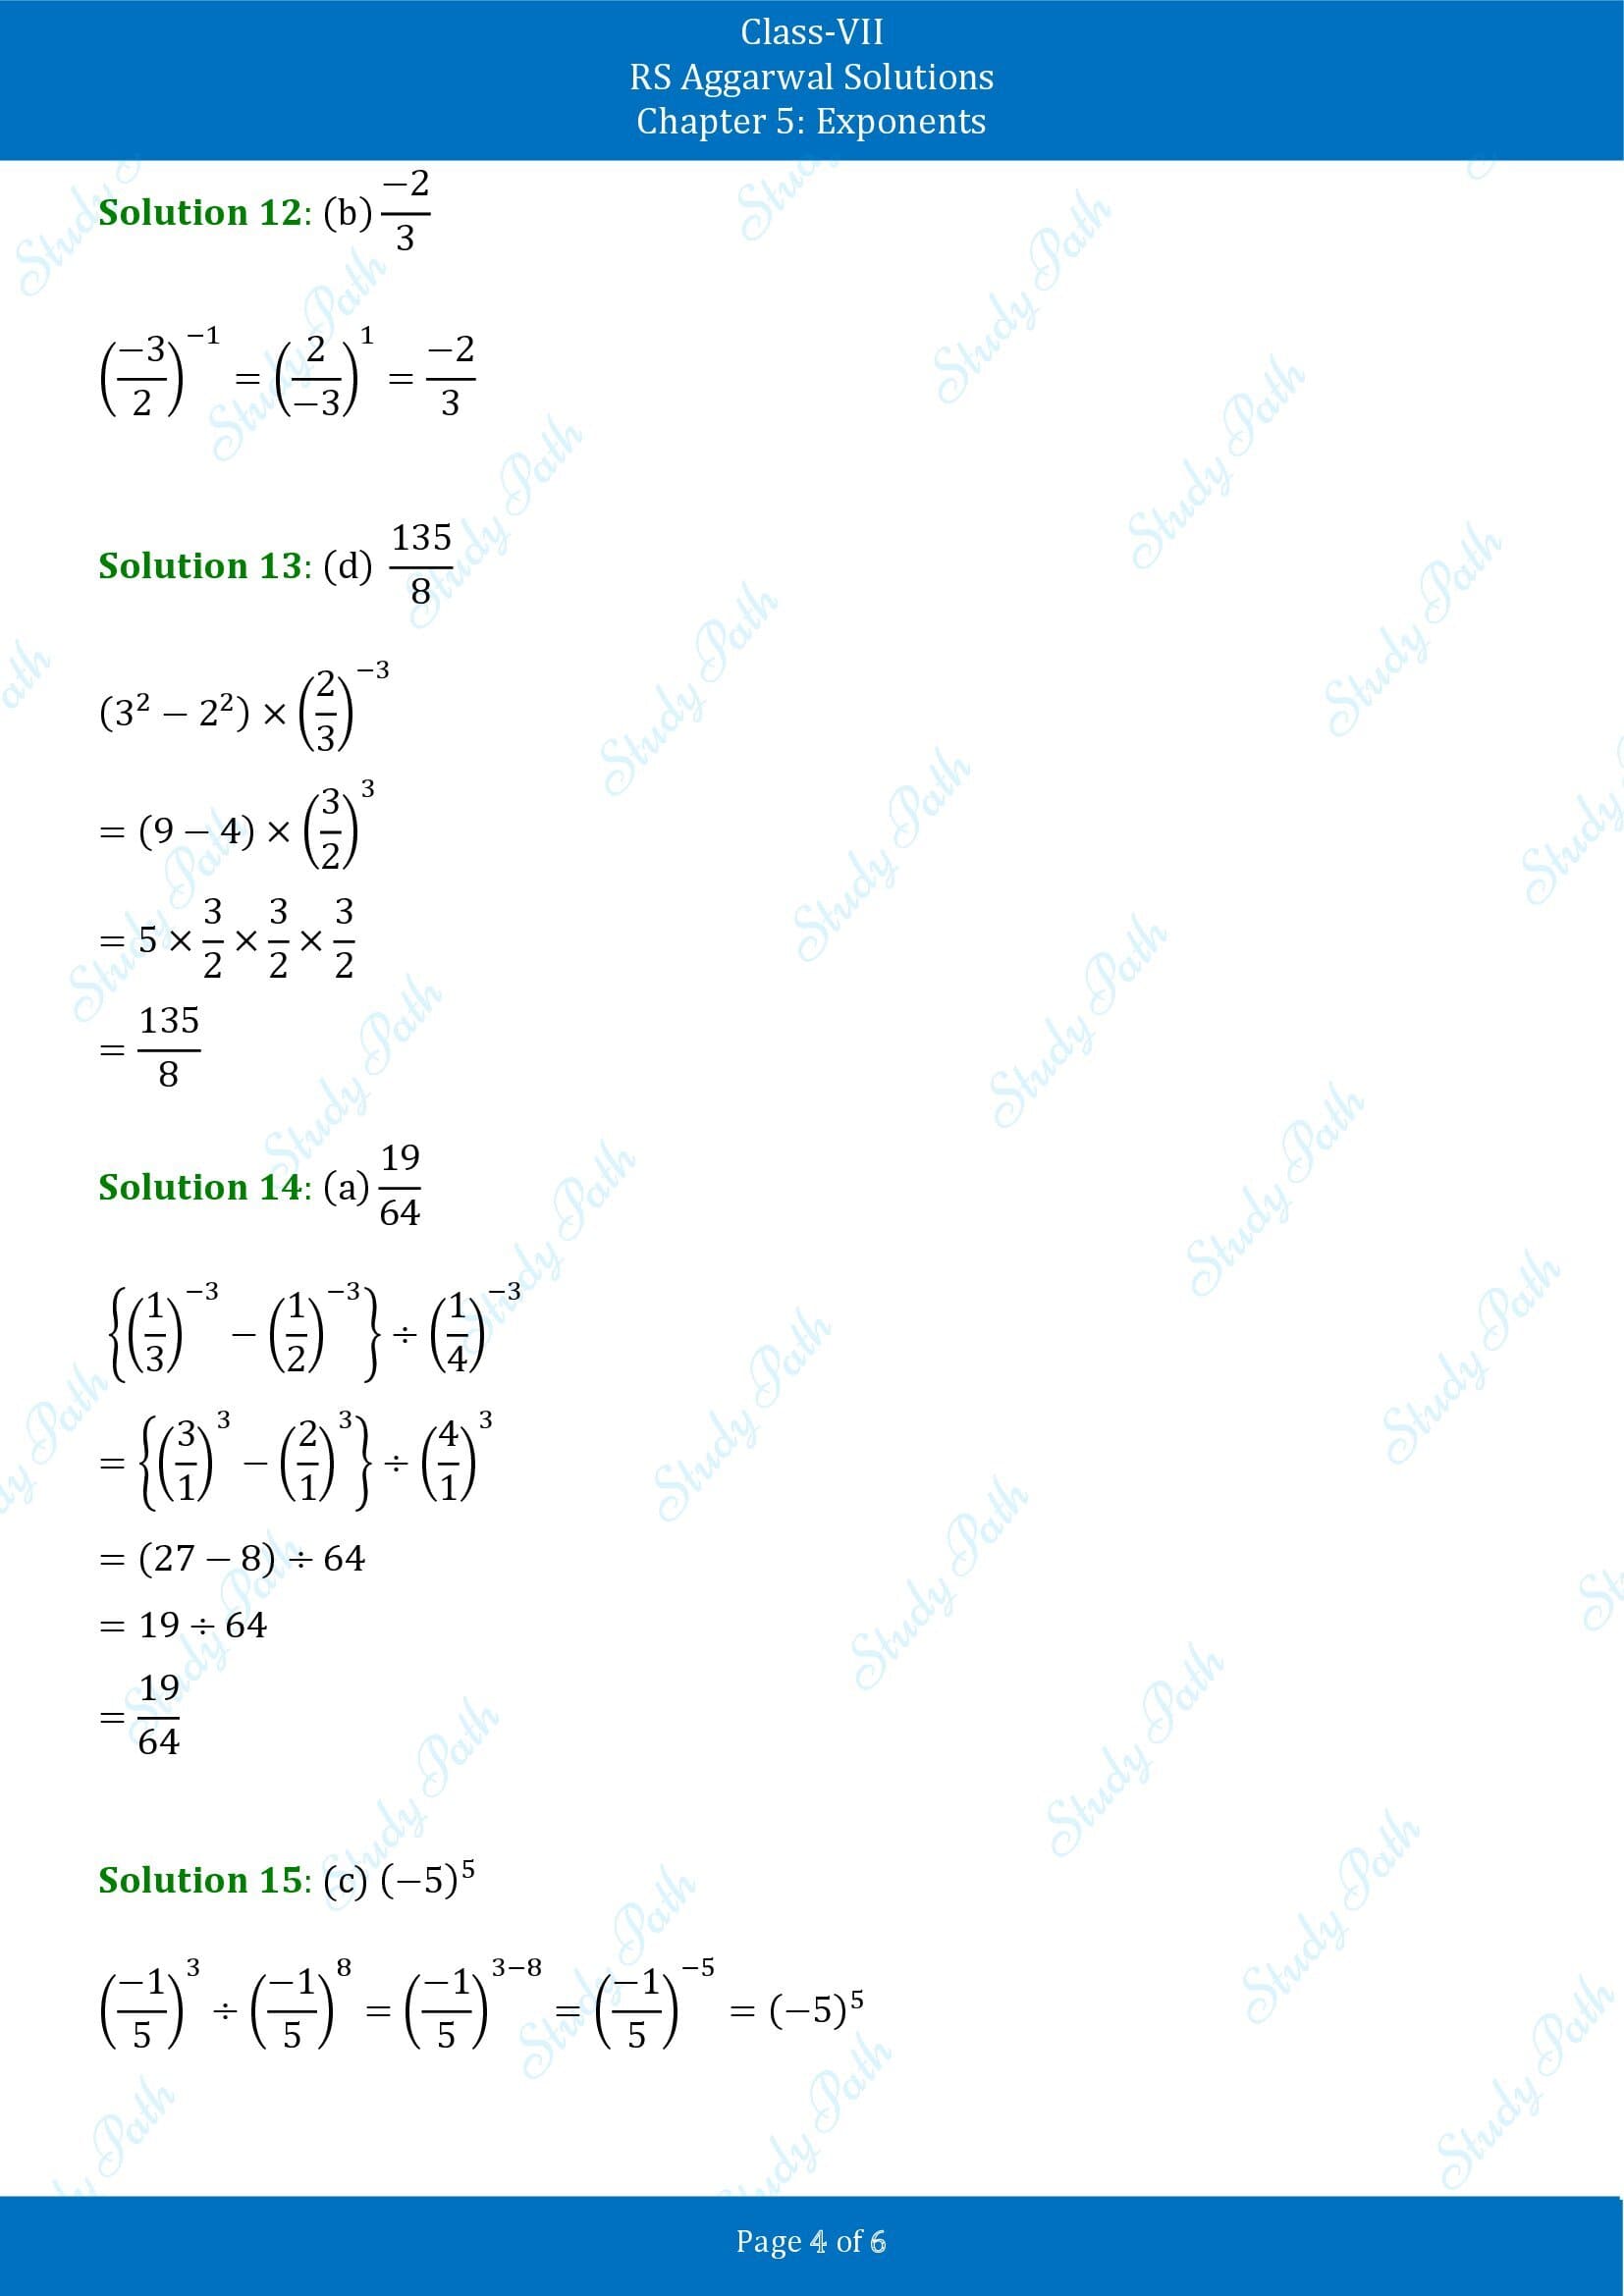 RS Aggarwal Solutions Class 7 Chapter 5 Exponents Exercise 5C MCQ 00004